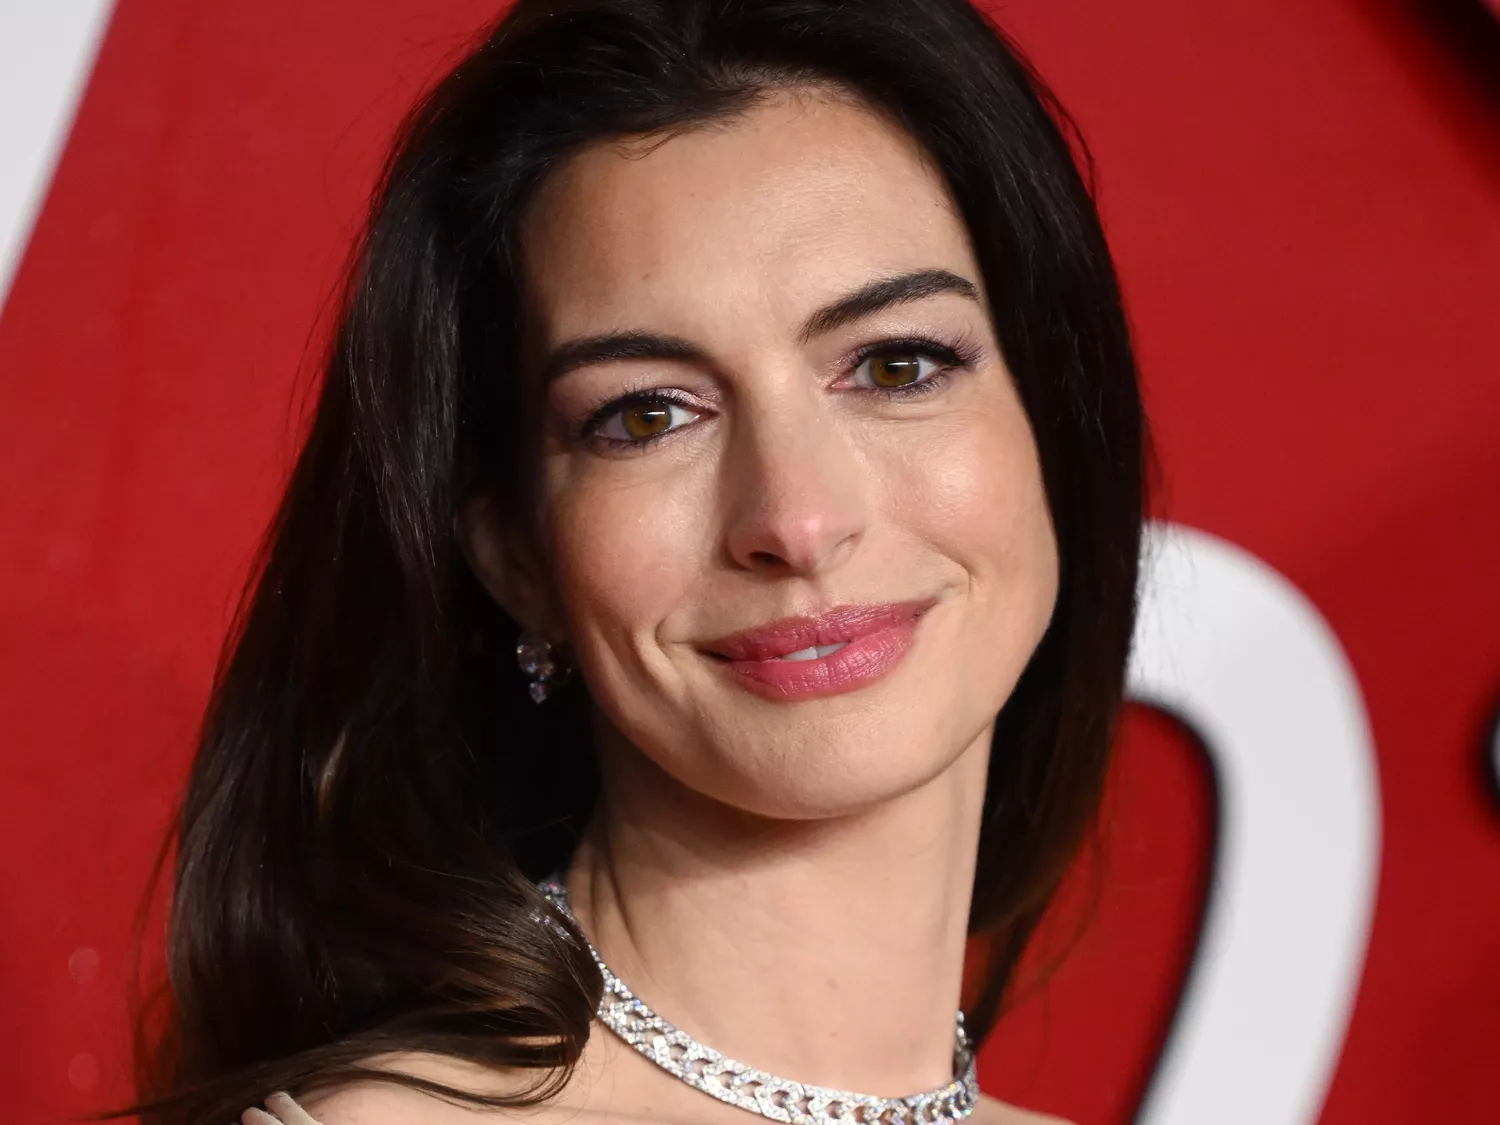 Anne Hathaway Wore the Foundation Shoppers Call “Smoothing and Perfecting”